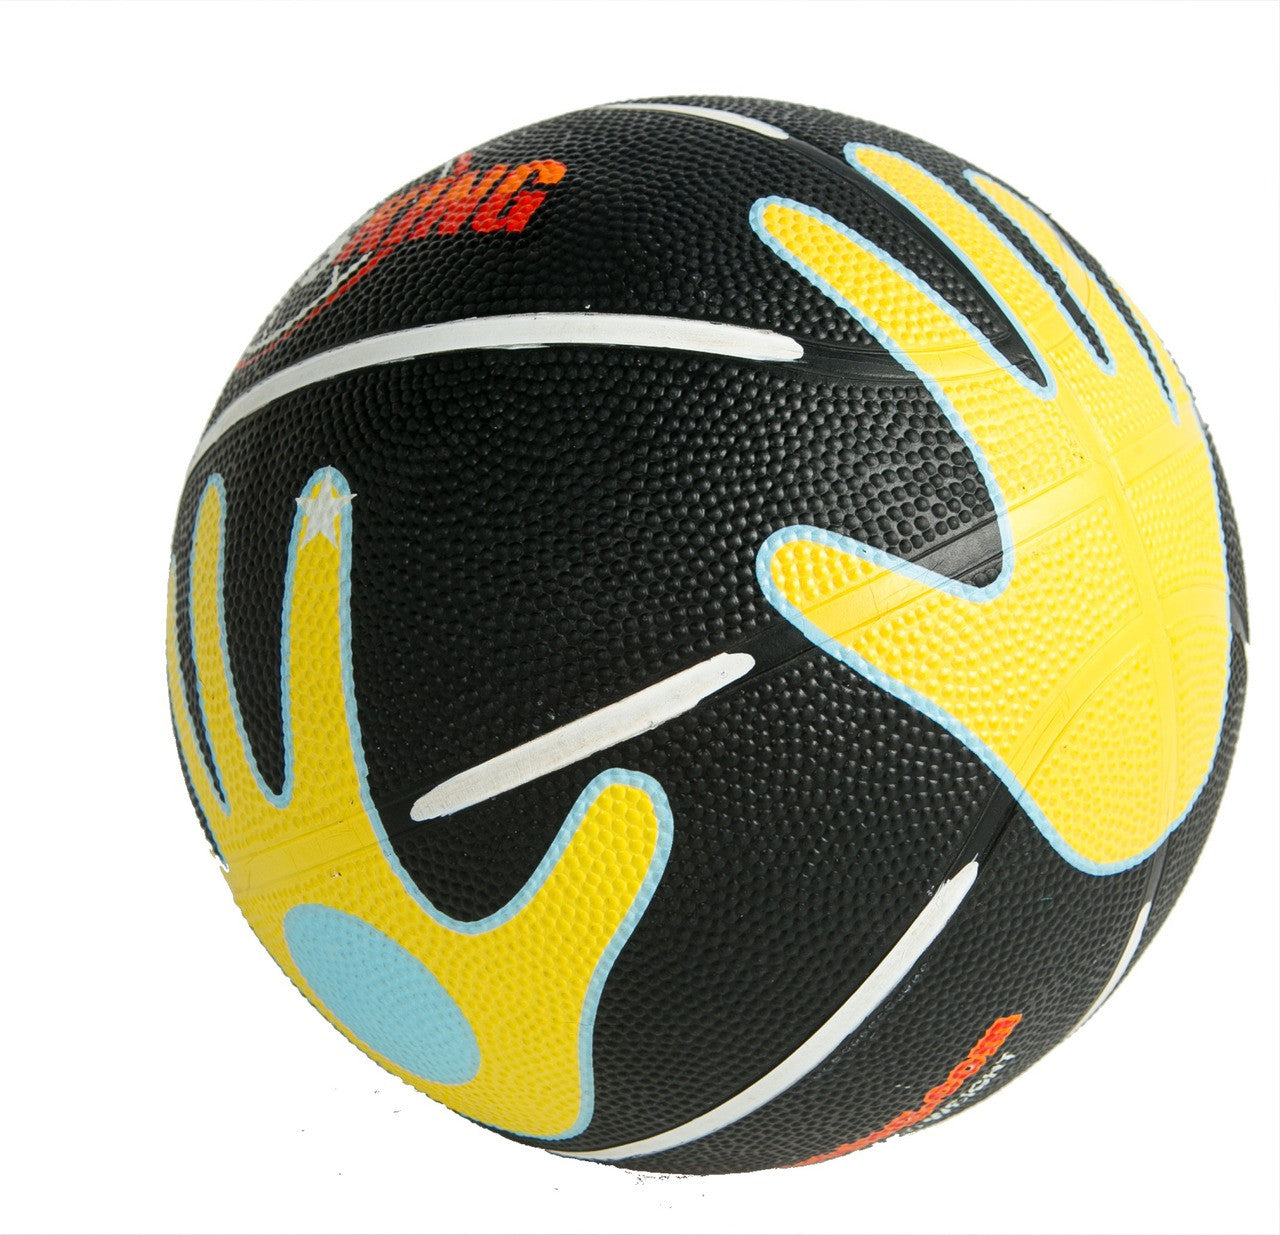 Basketball with hands printed on it.